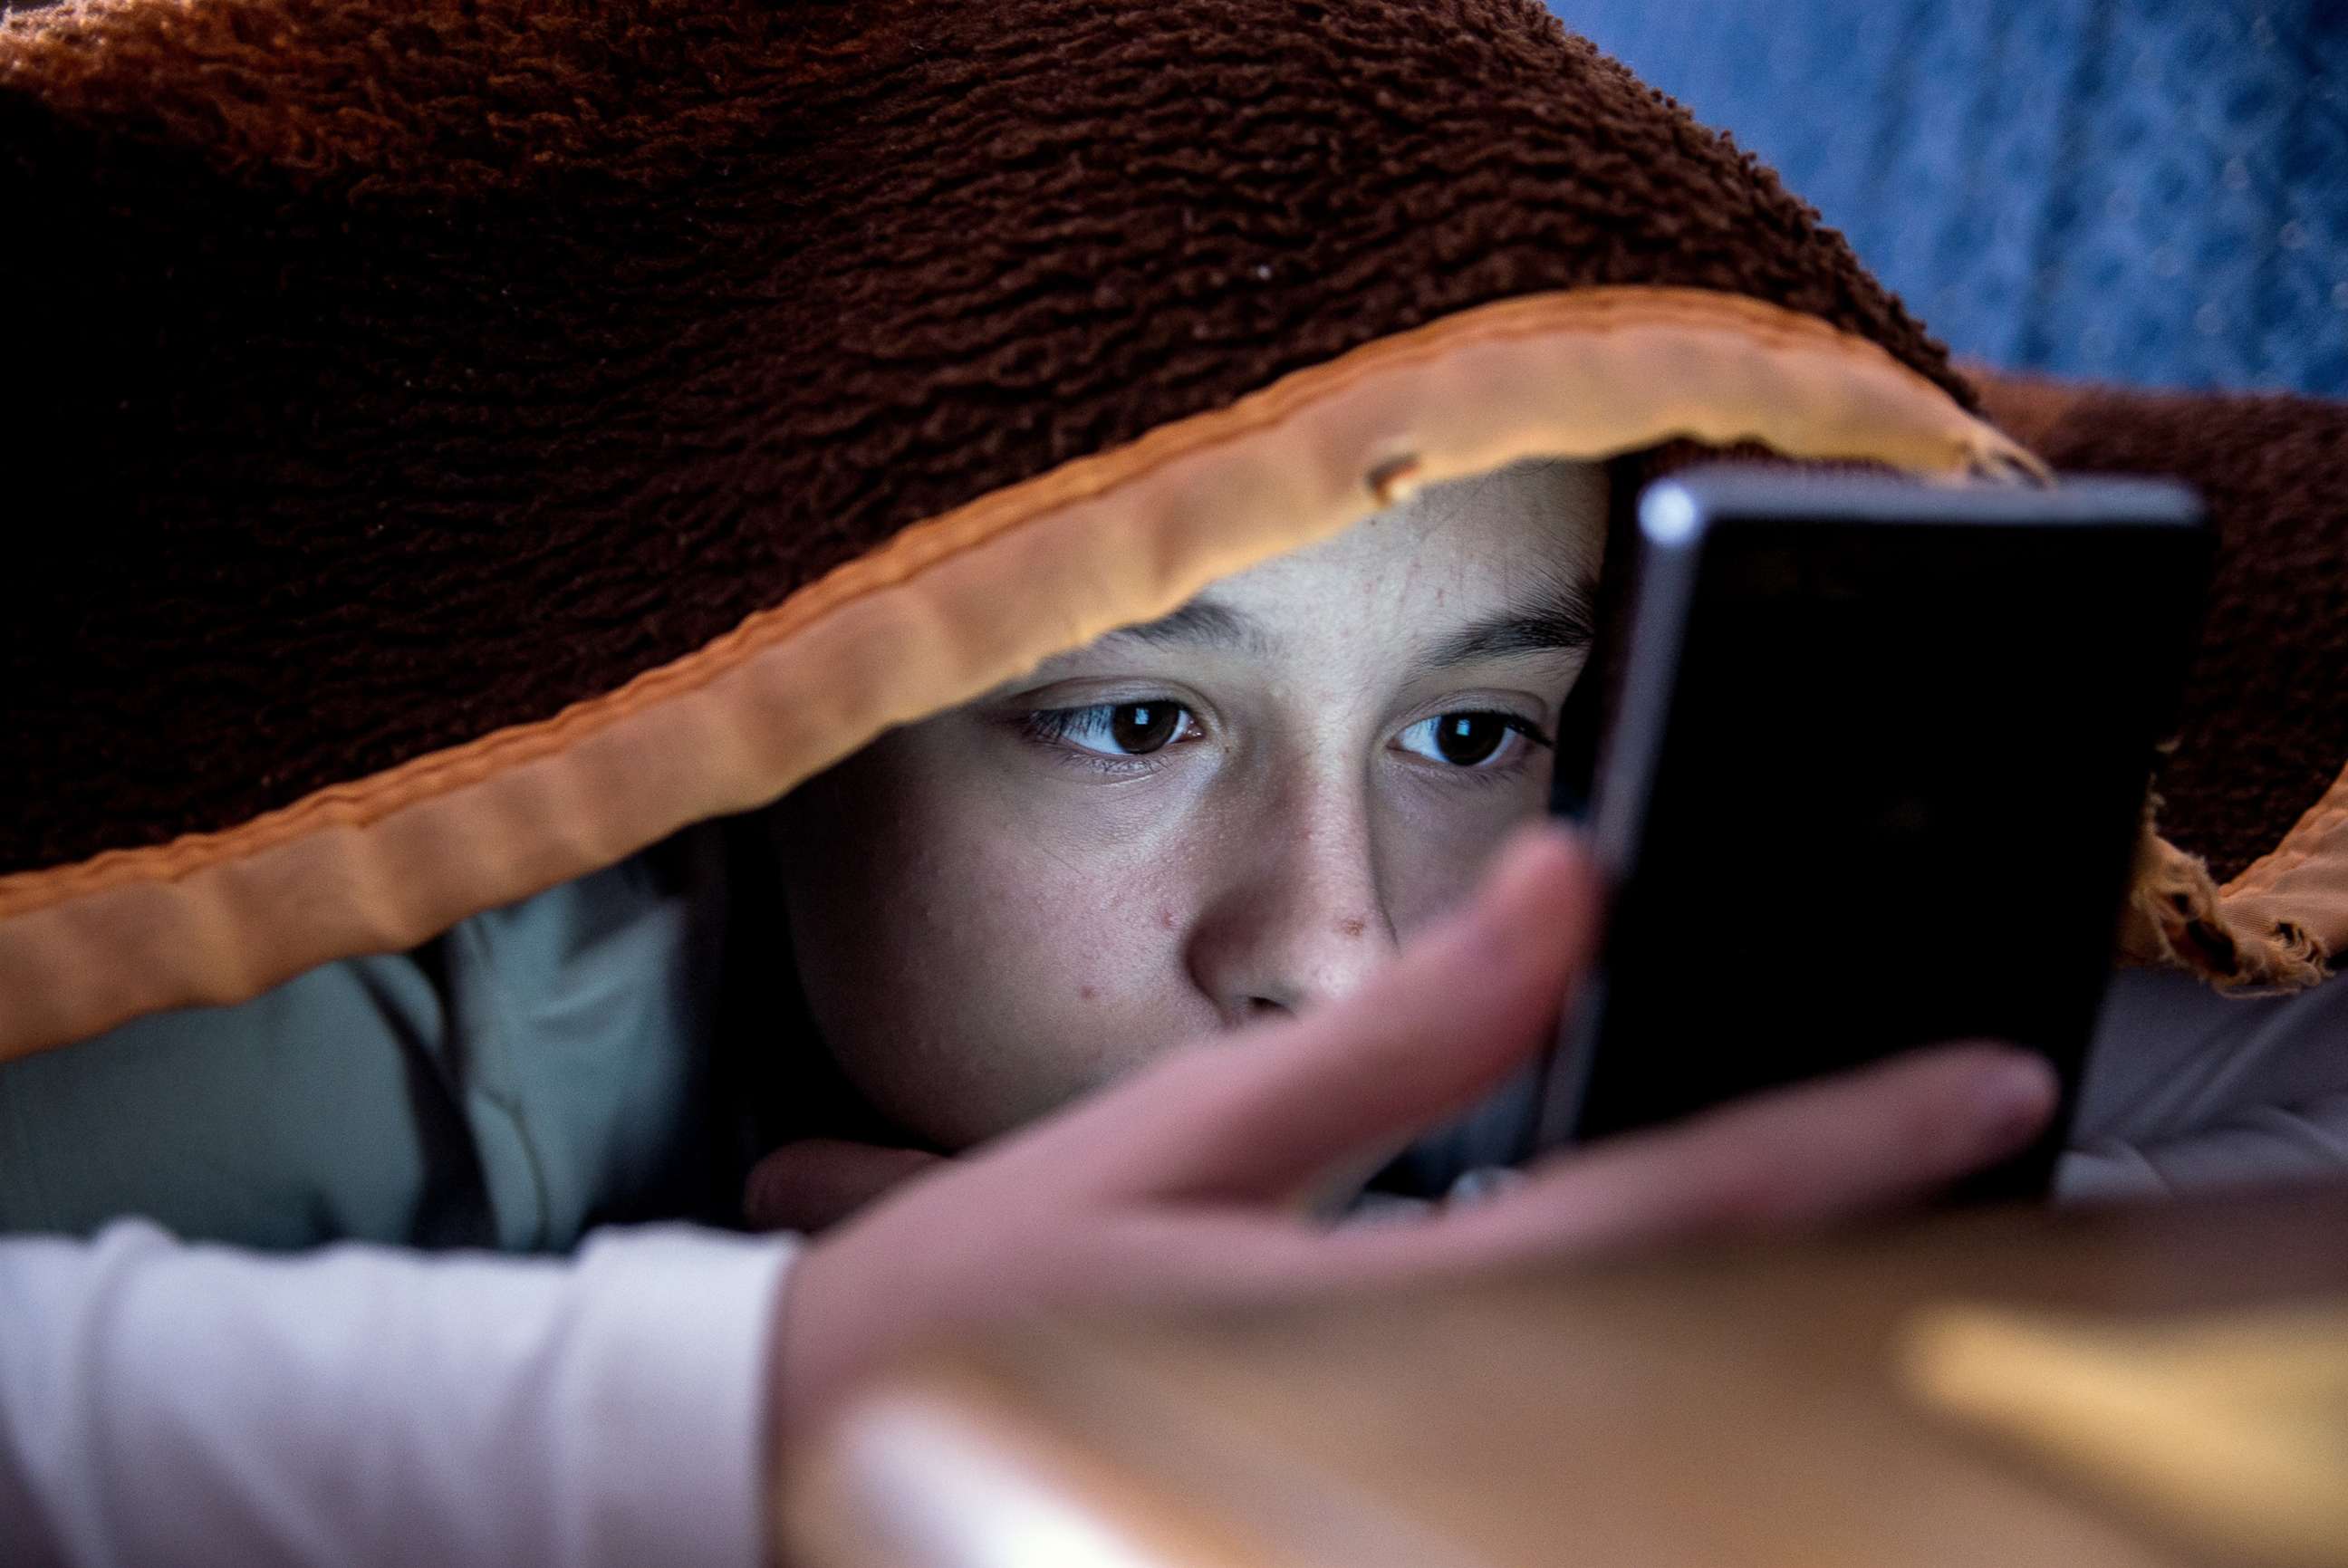 PHOTO: An undated stock photo depicts a young woman looking at her phone with her head under a blanket.